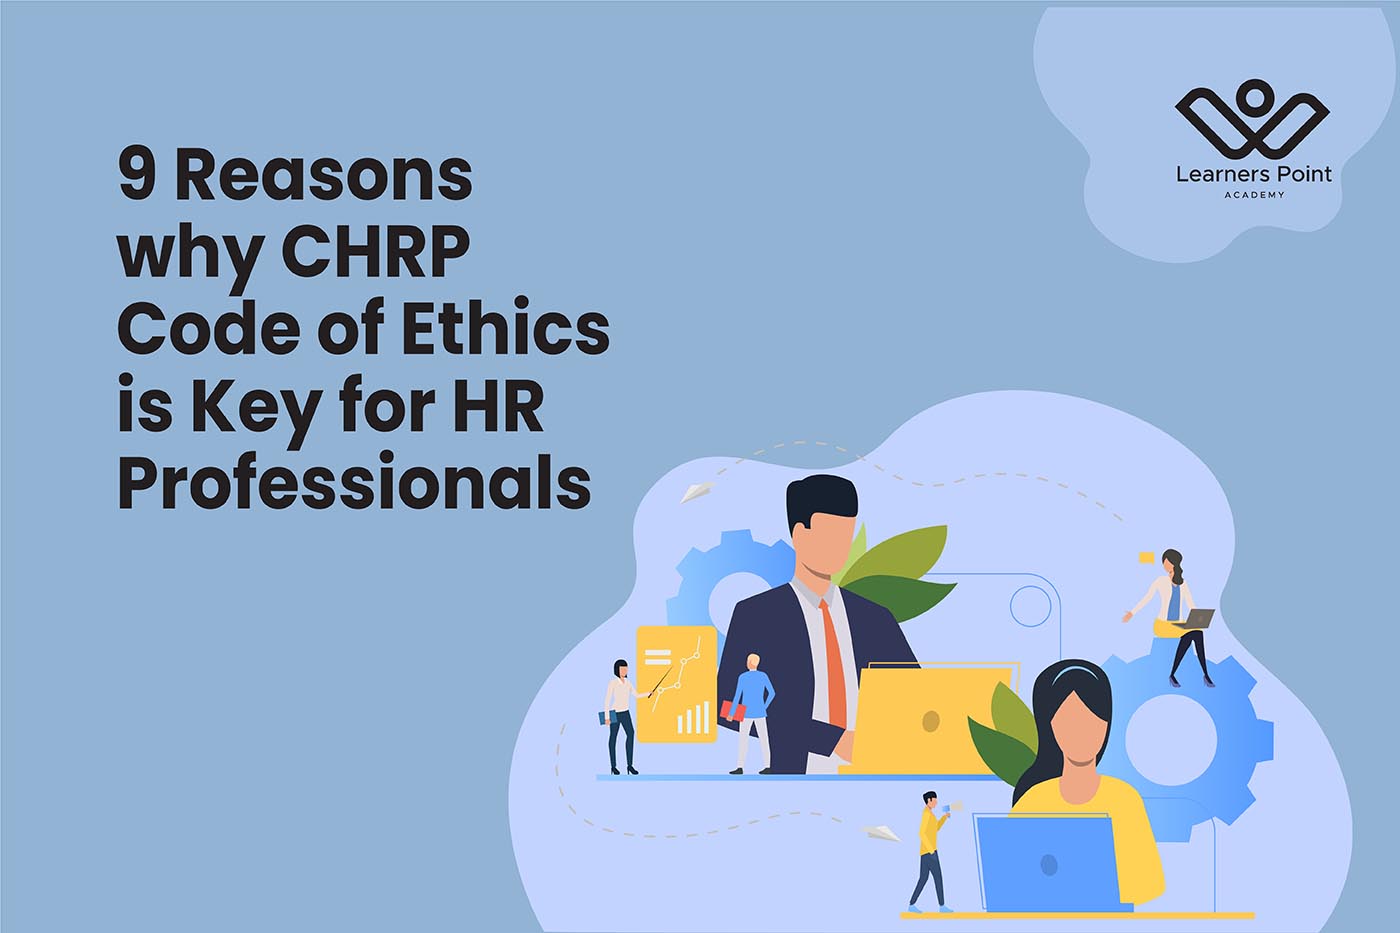 9 Reasons why CHRP Code of Ethics is Key for HR Professionals